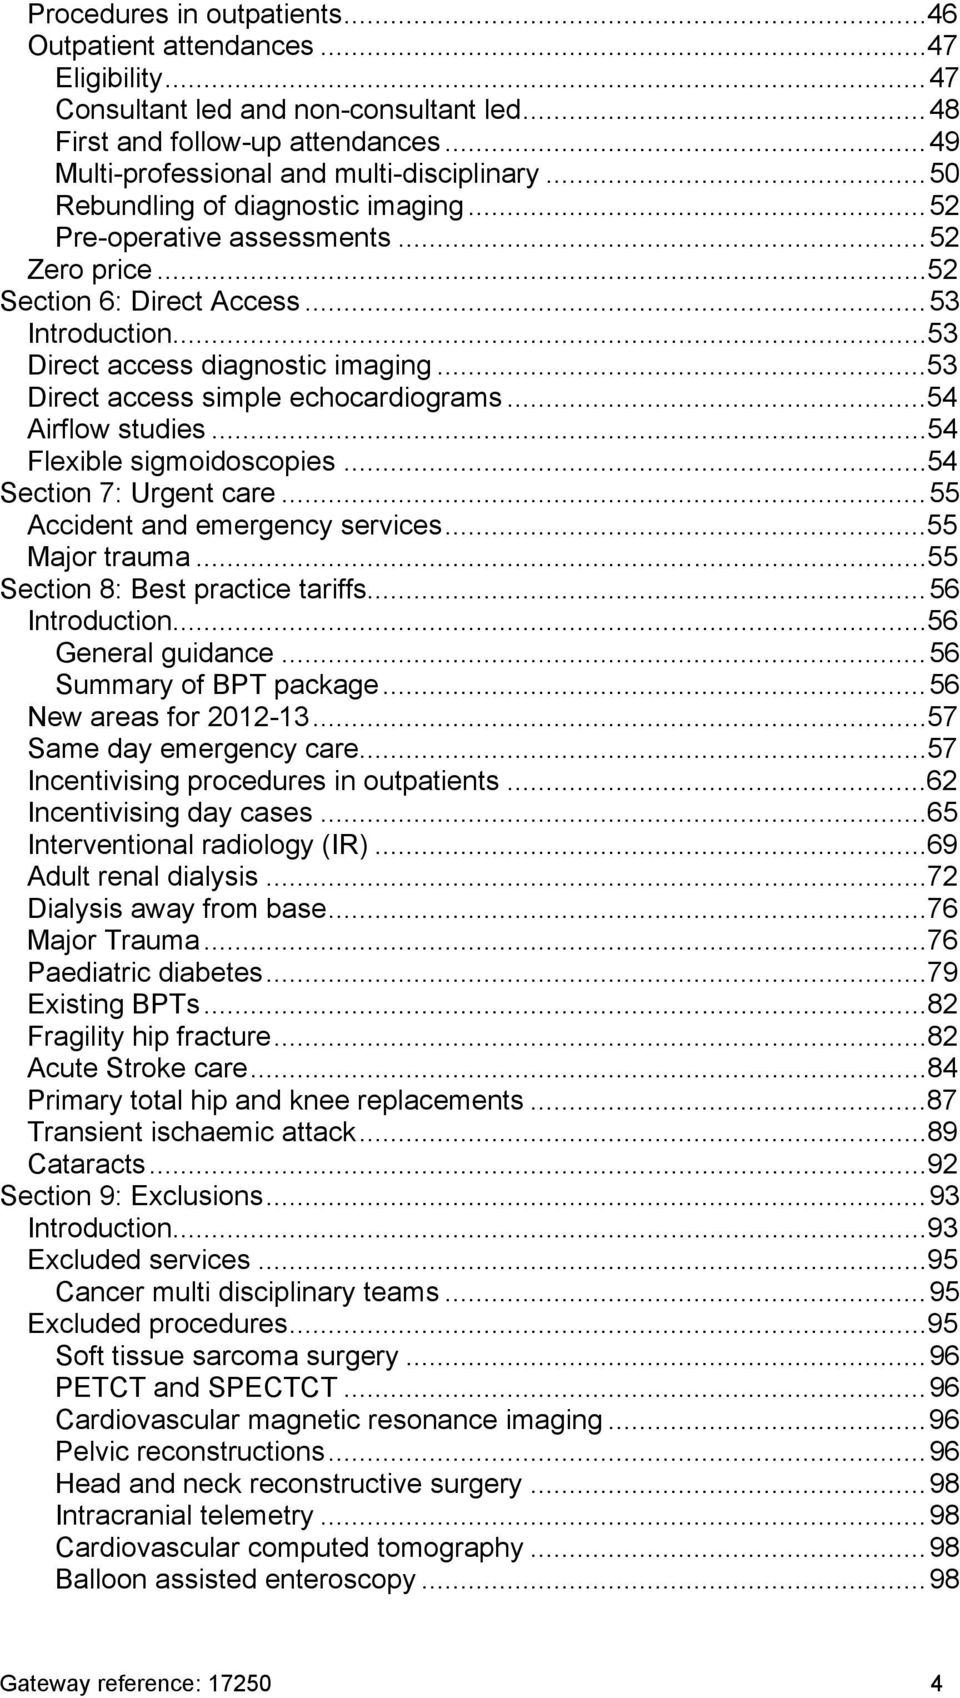 ..53 Direct access simple echocardiograms...54 Airflow studies...54 Flexible sigmoidoscopies...54 Section 7: Urgent care...55 Accident and emergency services...55 Major trauma.